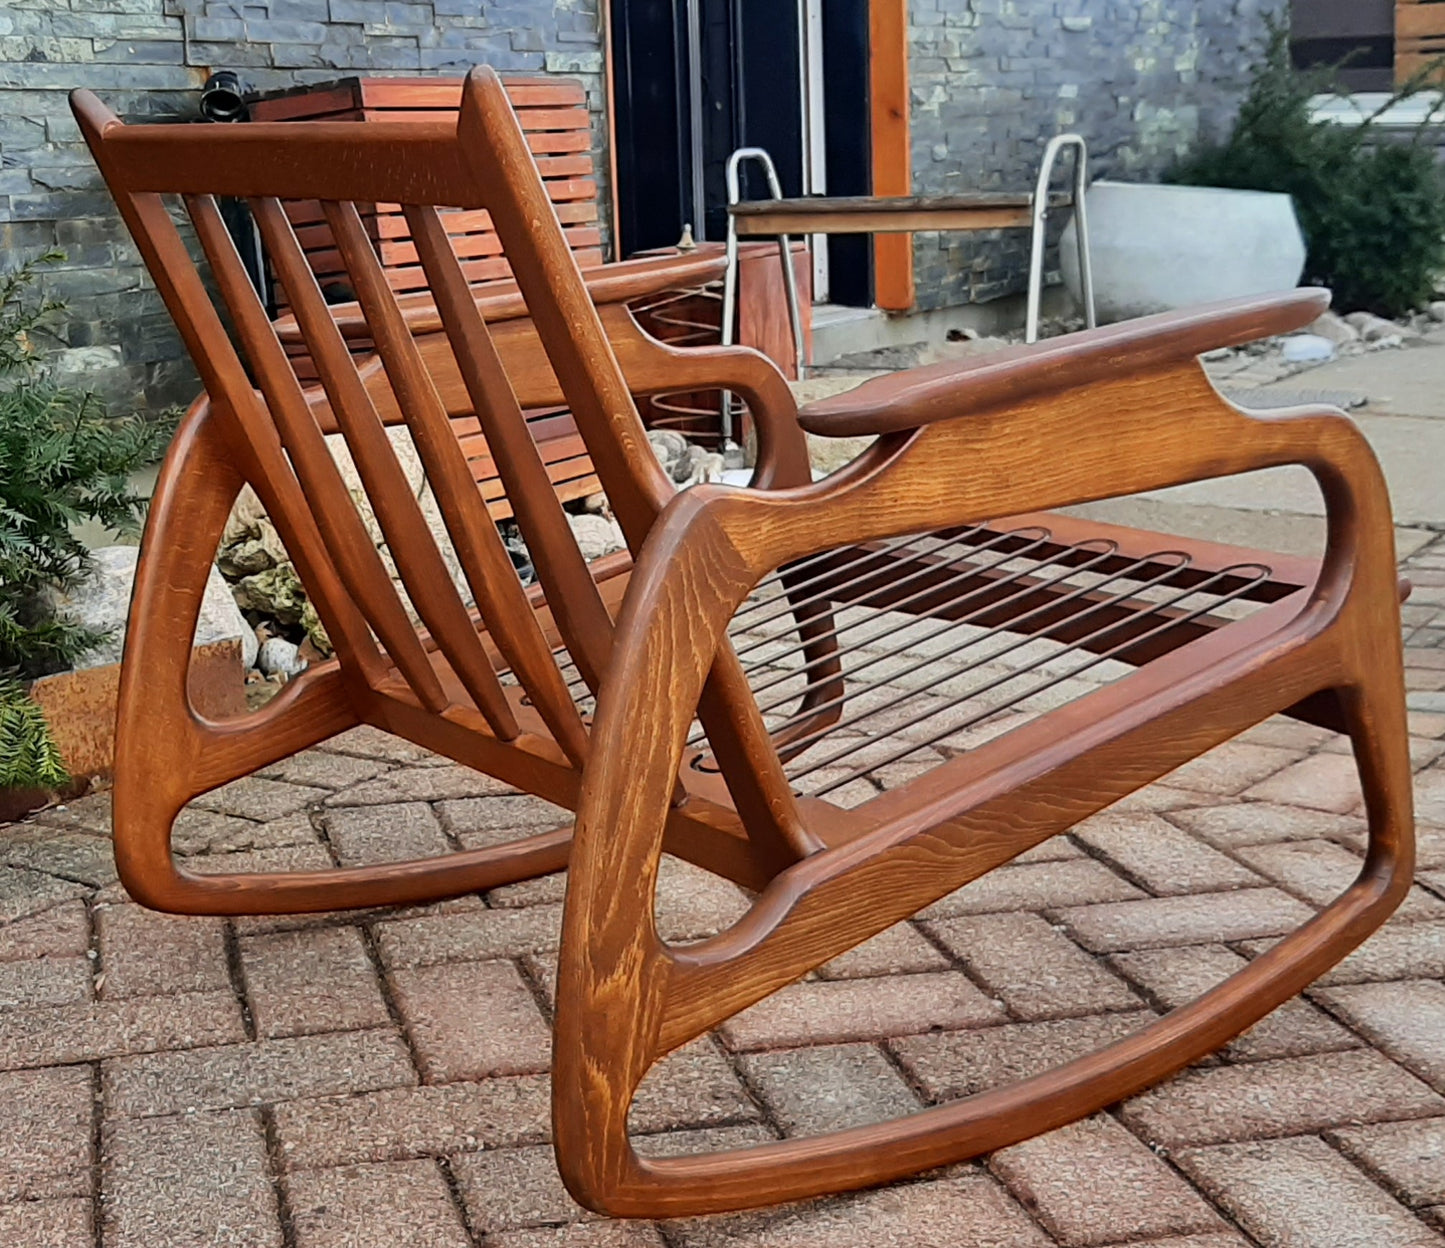 REFINISHED MCM Rocking Chair by Adrian Pearsall, includes NEW CUSHIONS, Perfect